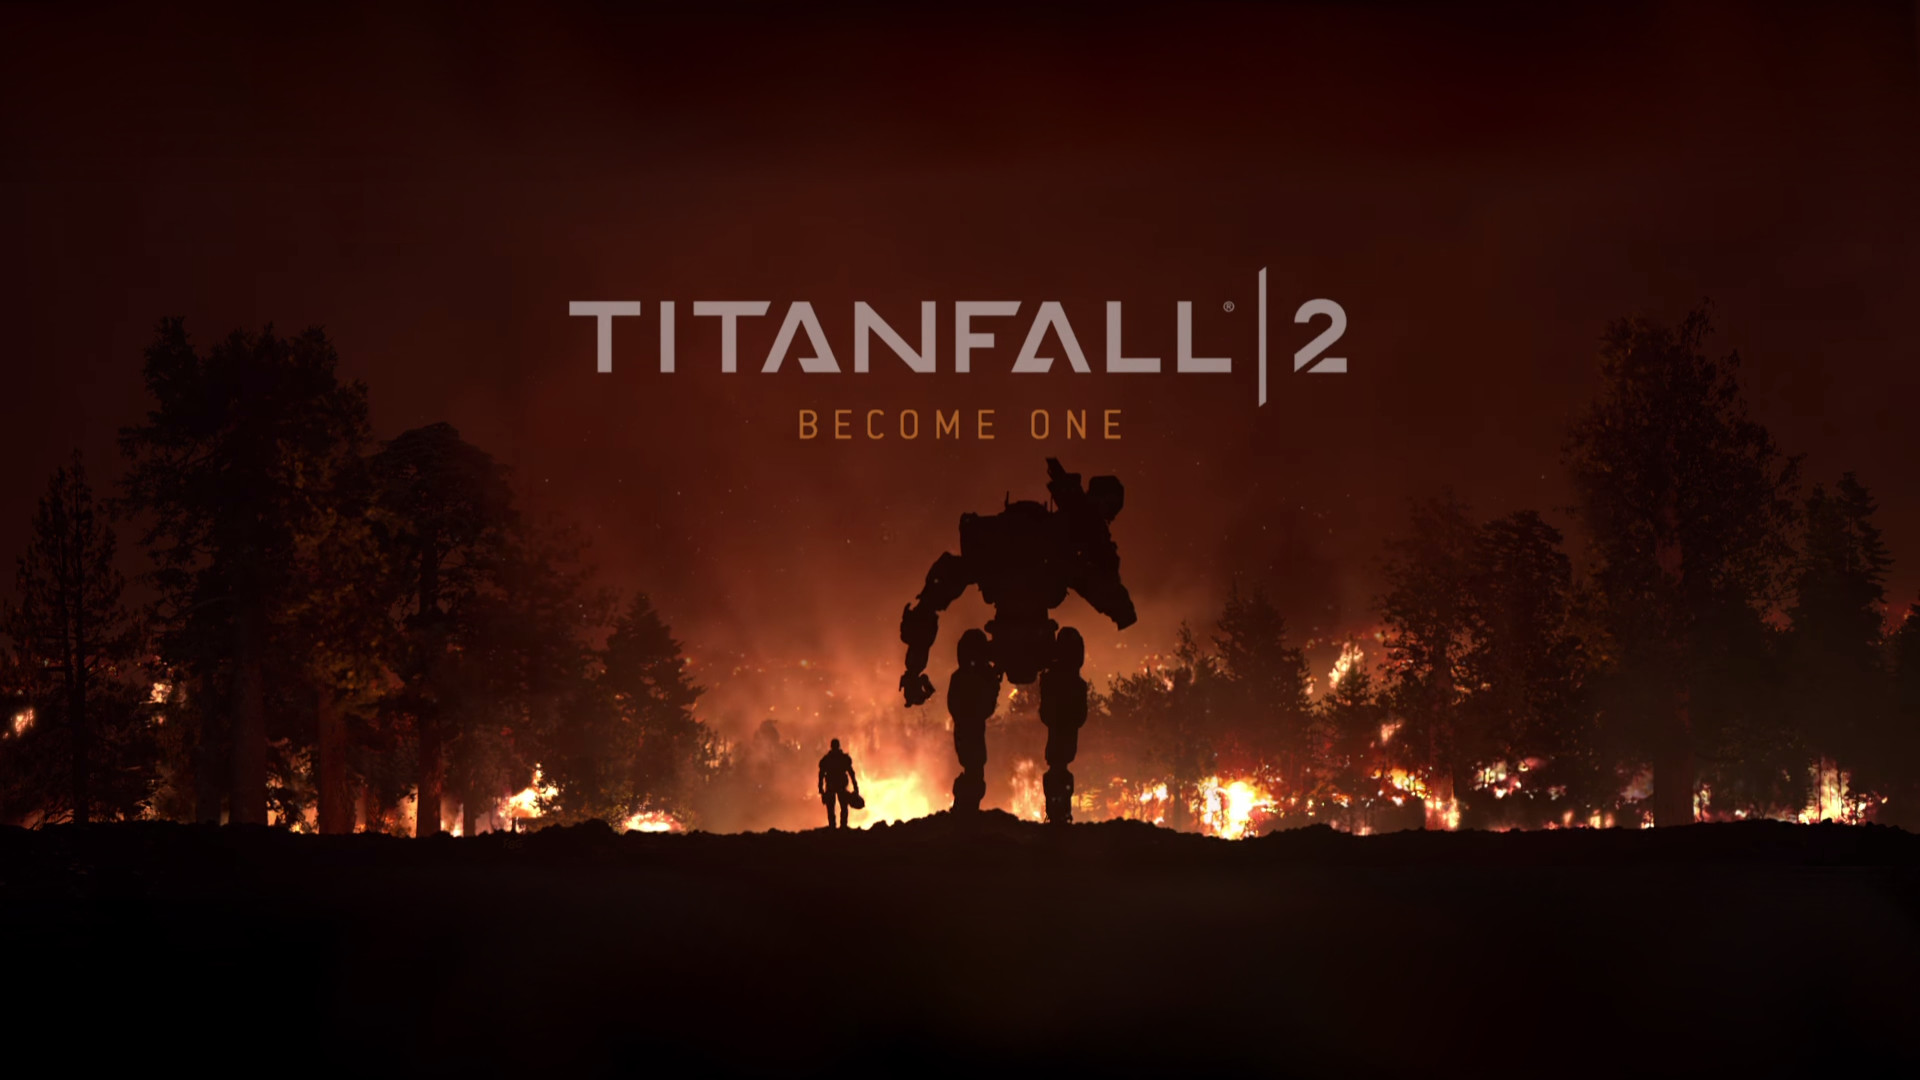 80+ Titanfall 2 HD Wallpapers and Backgrounds